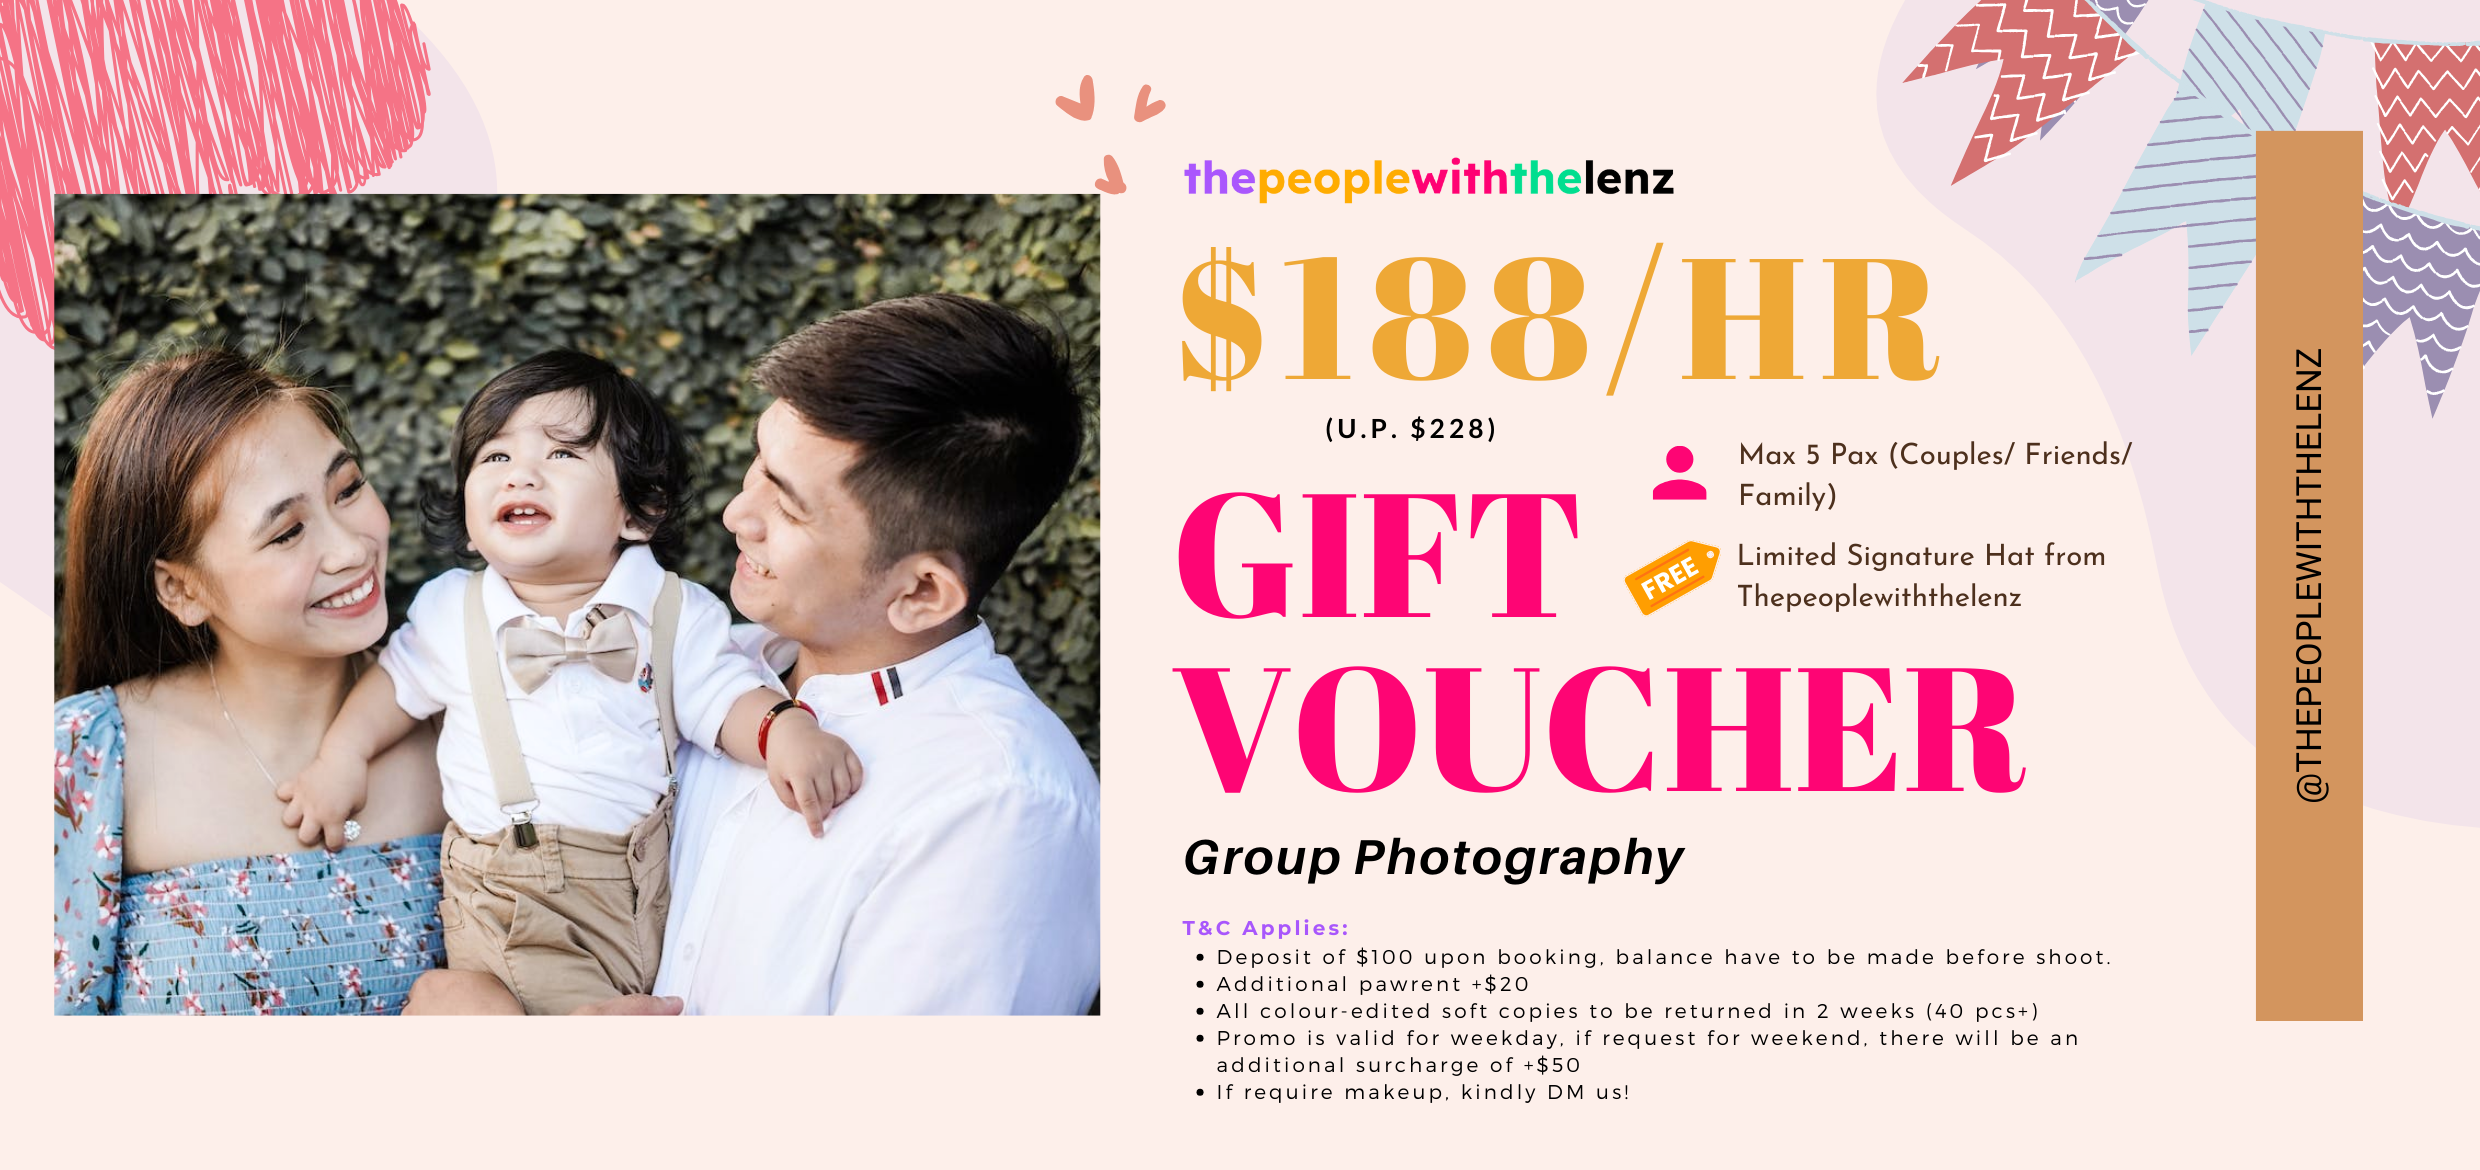 $228/HR
Max 5 Pax (Couples/ Friends/Family)
• Deposit of $100 upon booking. balance have to be made before shoot
•. Additional pawrent +$20﻿﻿
• All colour-edited soft copies to be returned in 2 weeks 40 pcs+)
• ﻿﻿Promo Is valid Tor weekday, it request for weekend, there will be an additional surcharge of +$50
• 50 colour-edited soft copies return
• Complimentary signature hat per booking (worth $40)
﻿﻿• If require makeup, kindly DM Us!

T&C Applies*